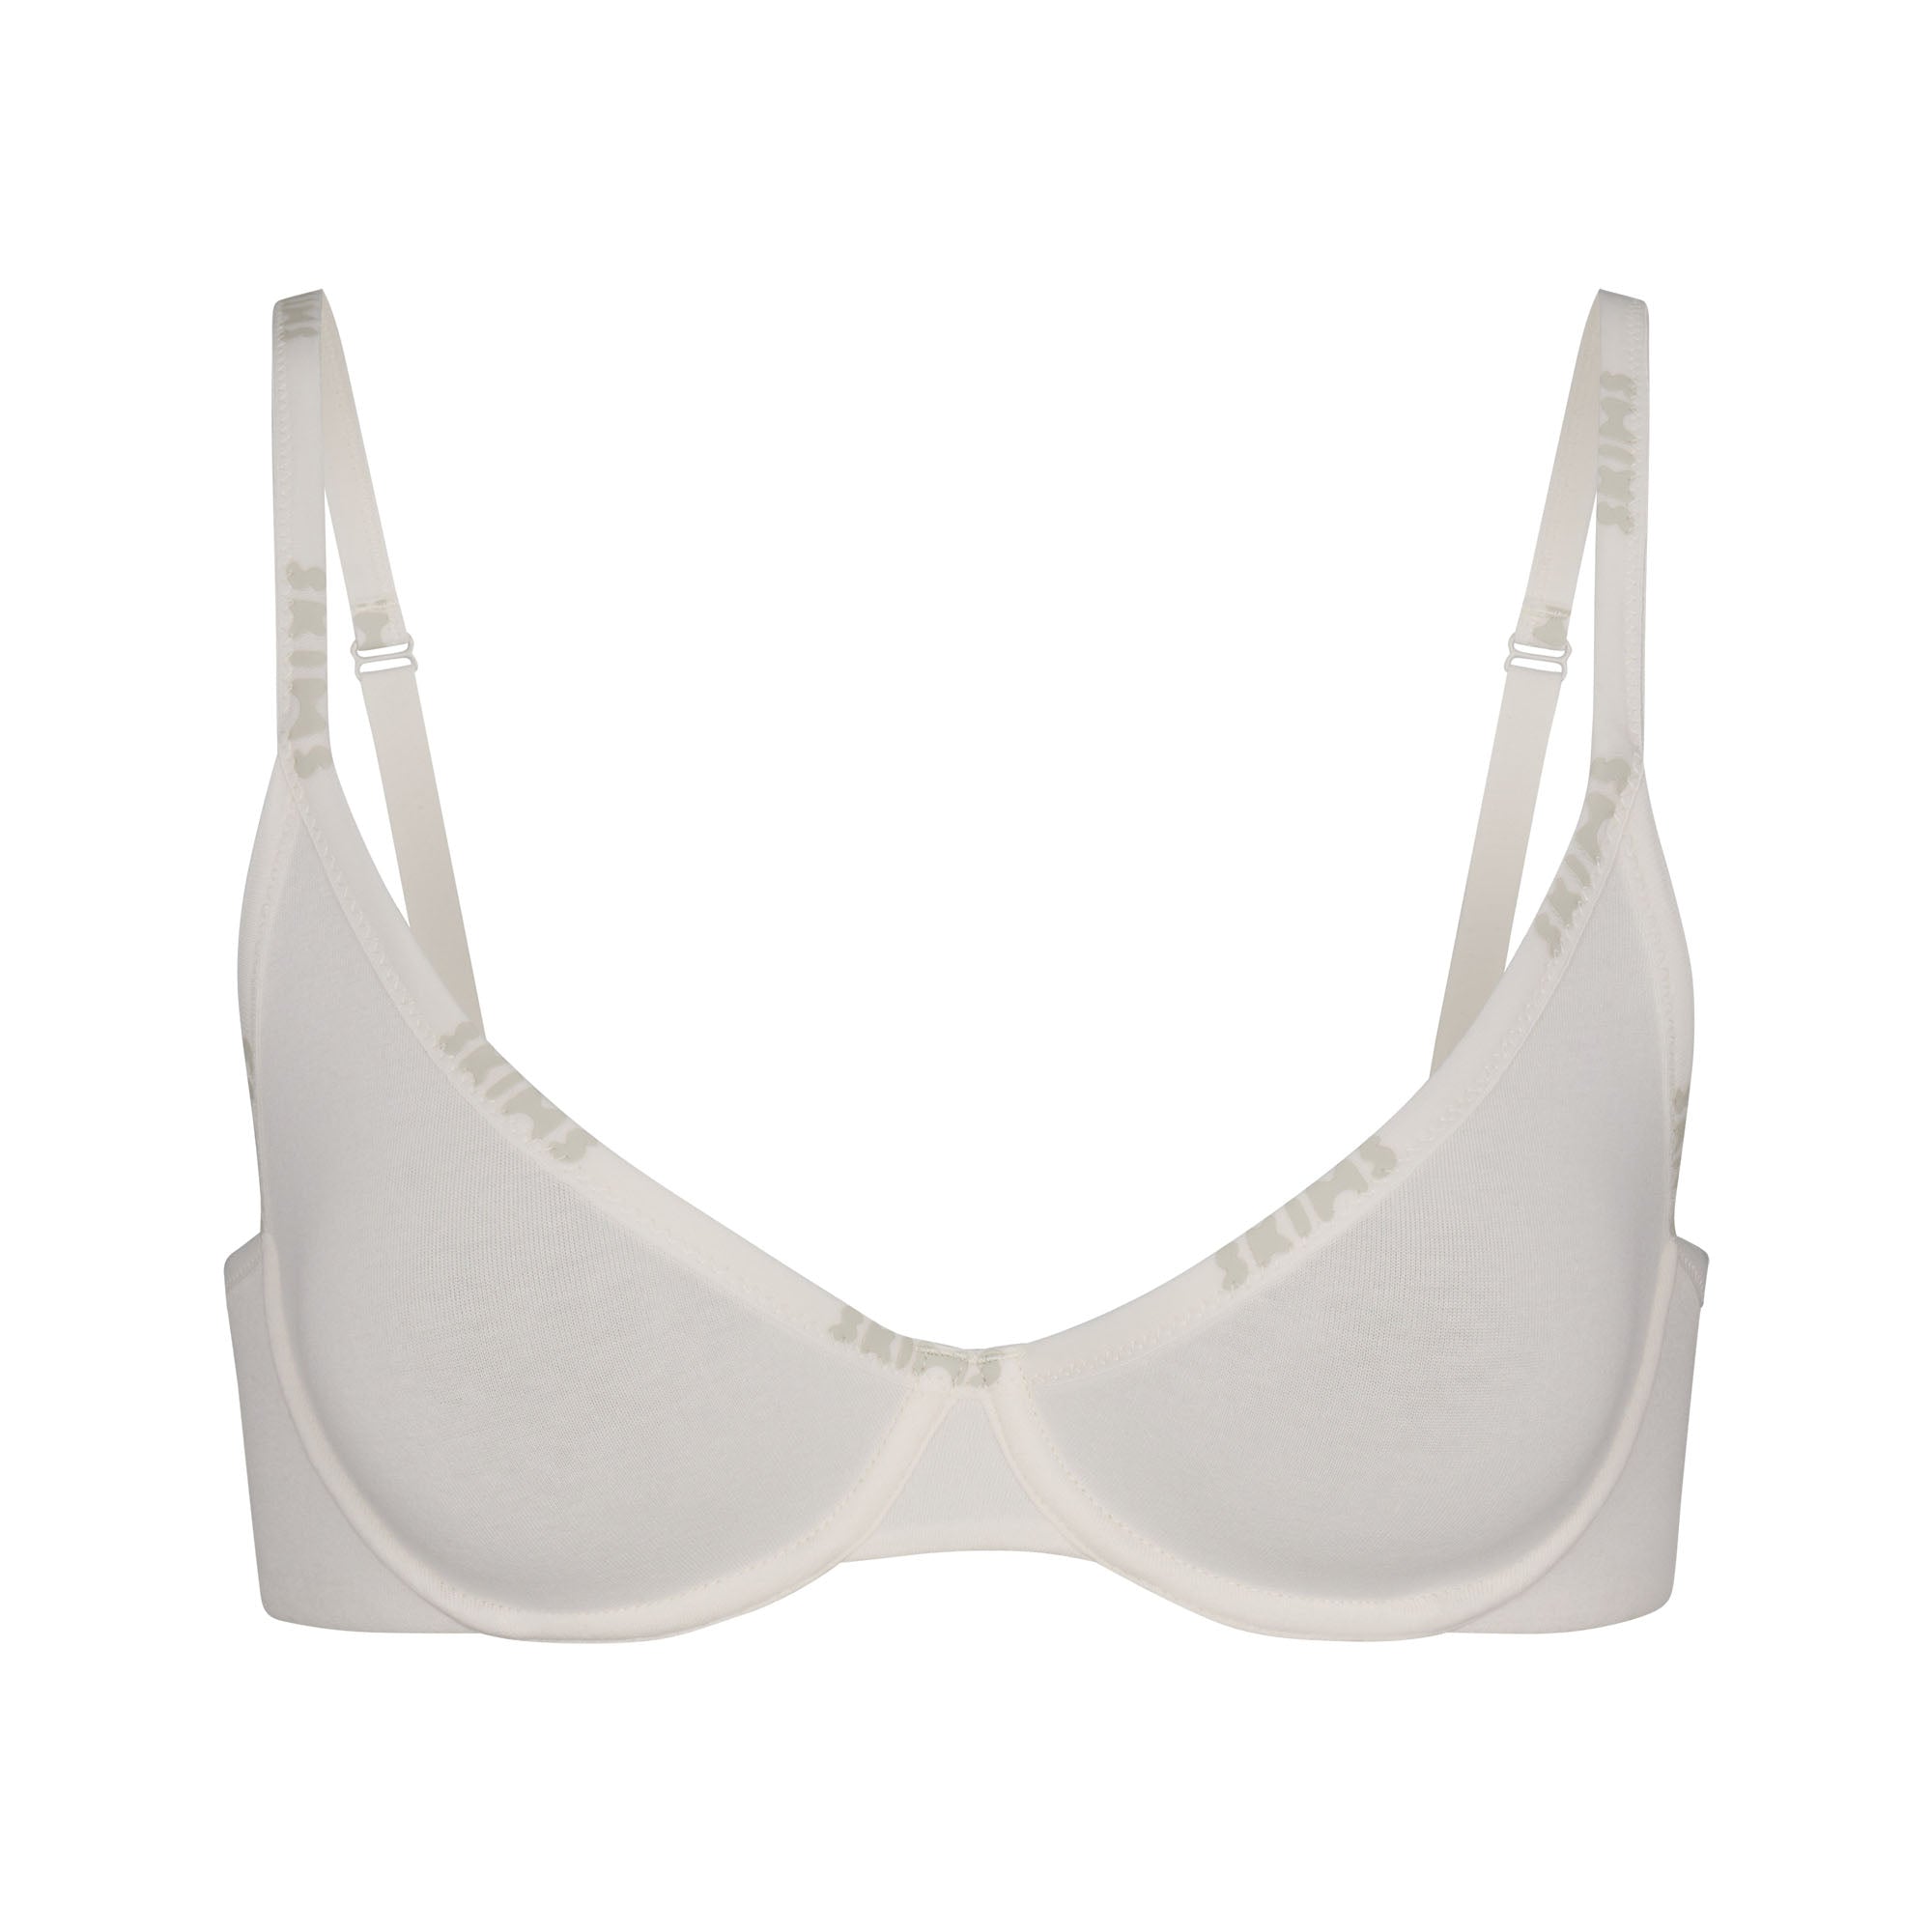 Track Skims Lace Unlined Balconette Bra - Marble - 46 - D at Skims